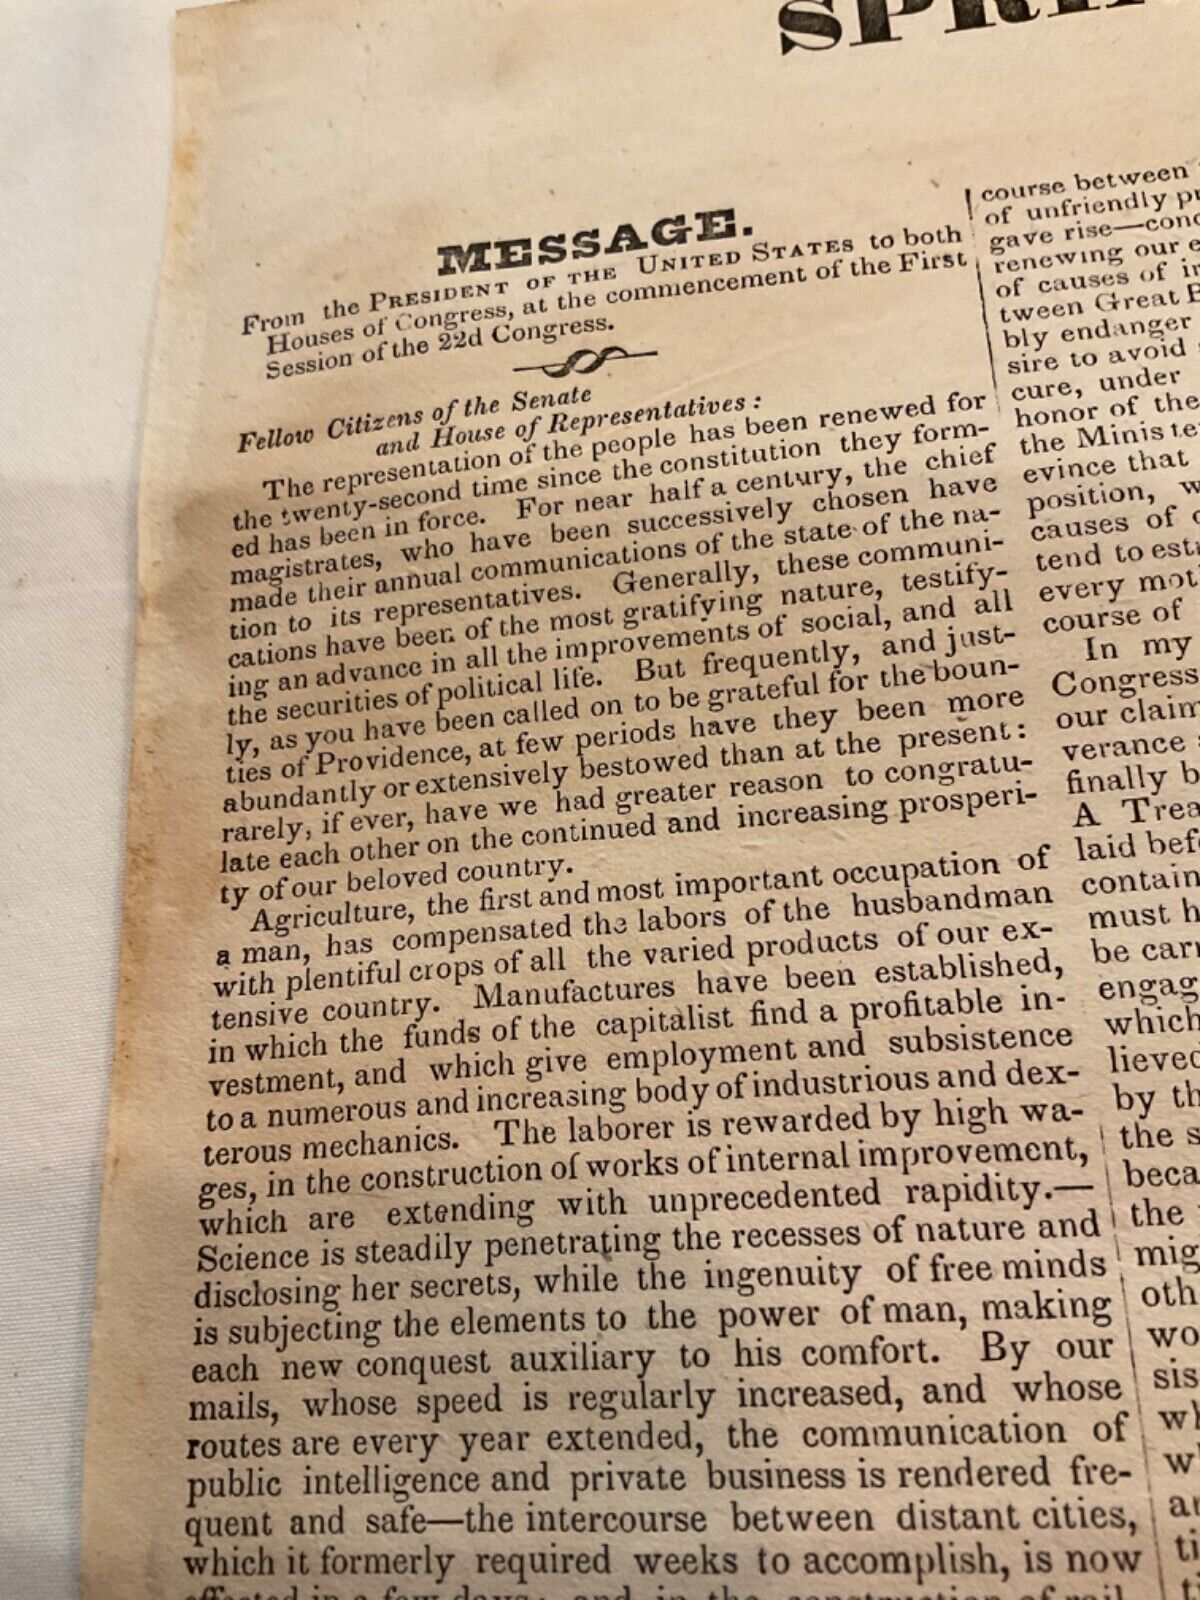 202 INDIAN REMOVAL ANDREW JACKSON BROADSIDE STATE OF THE UNION MESSAGE 1831